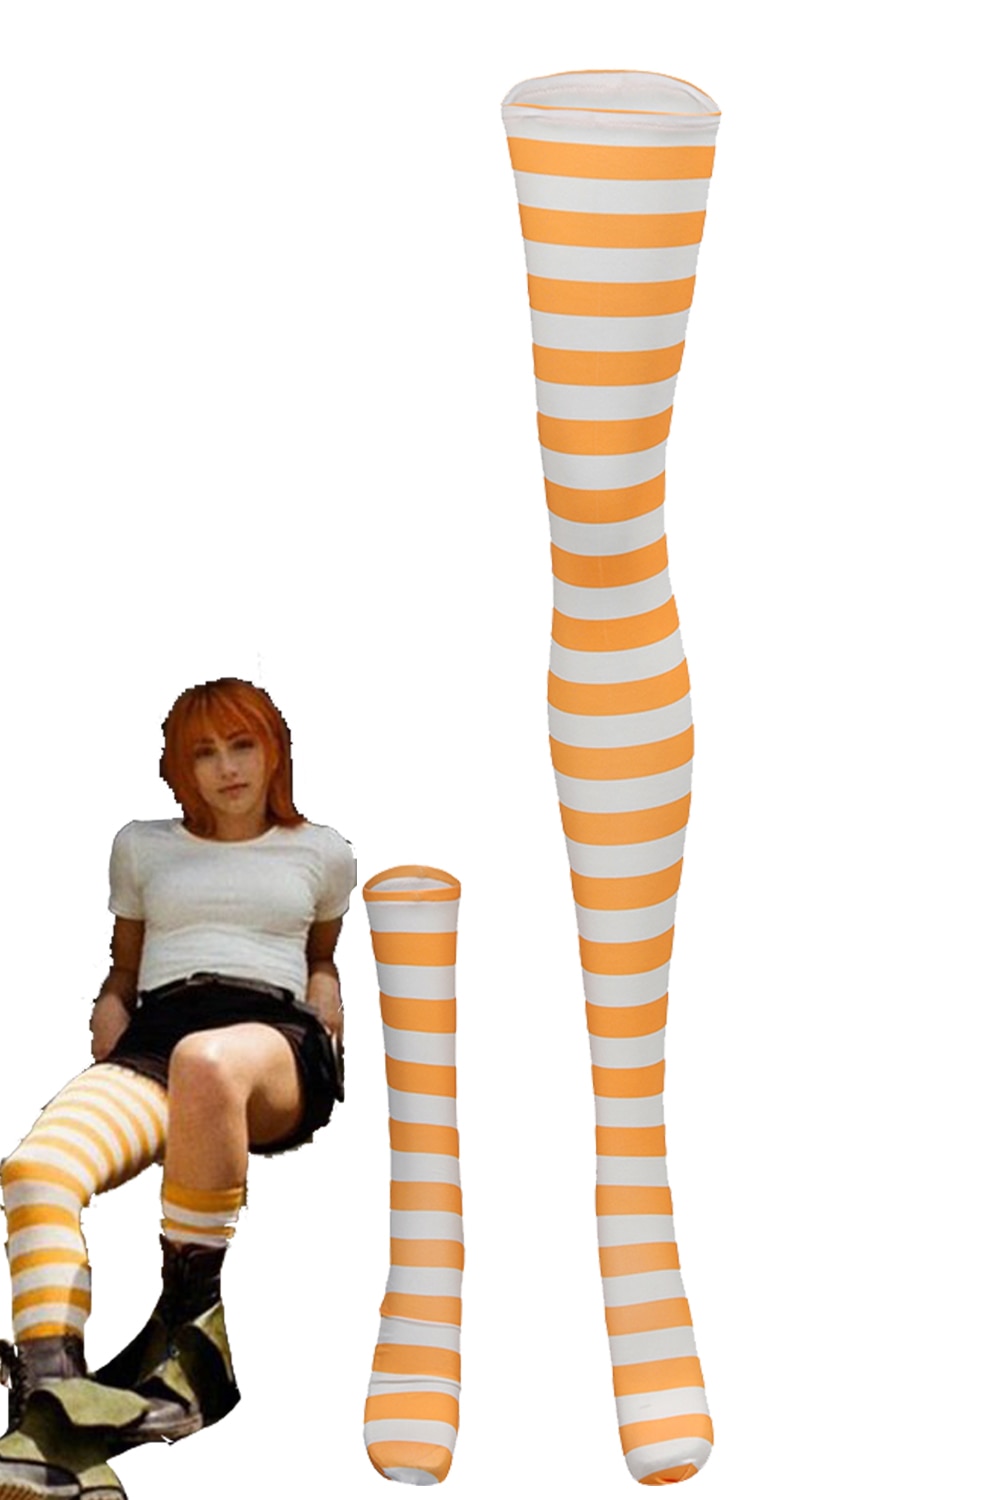 Live Action TV One Cos Piece Nami Cosplay Anime Women Costume Accessories Socks Striped Stocking Adult - One Piece Store